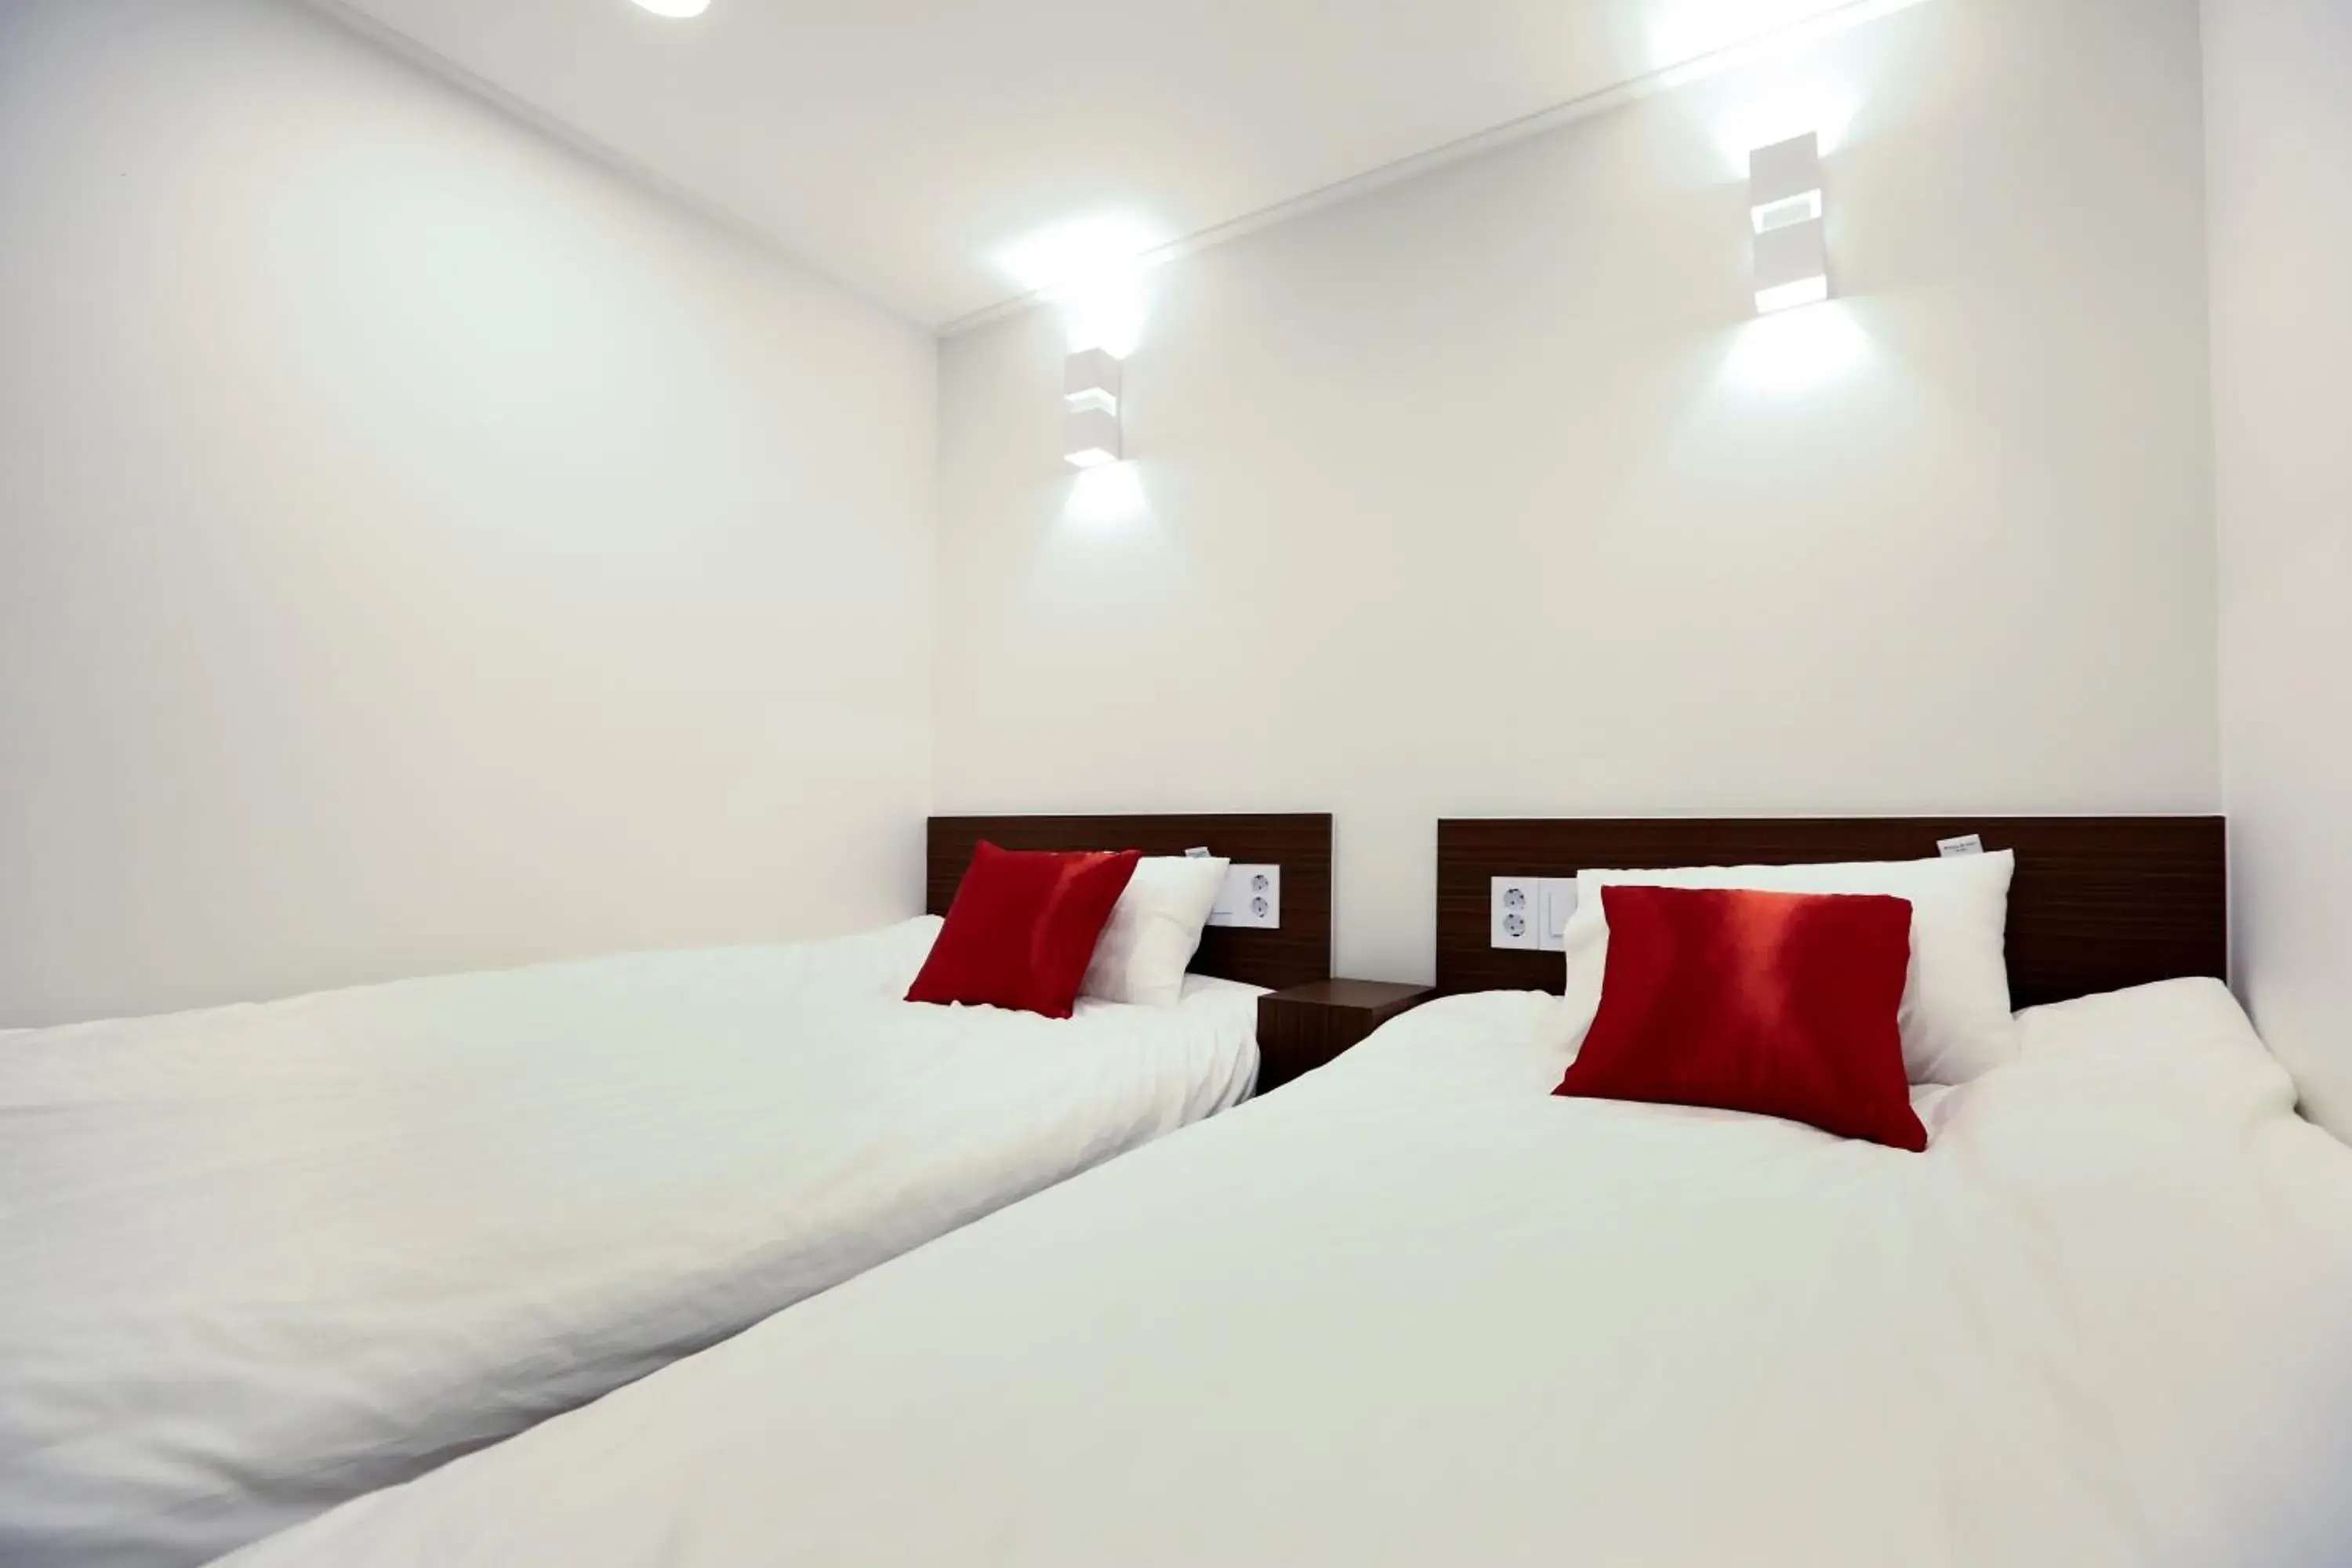 Bed, Room Photo in TRIPSTAY Myeongdong